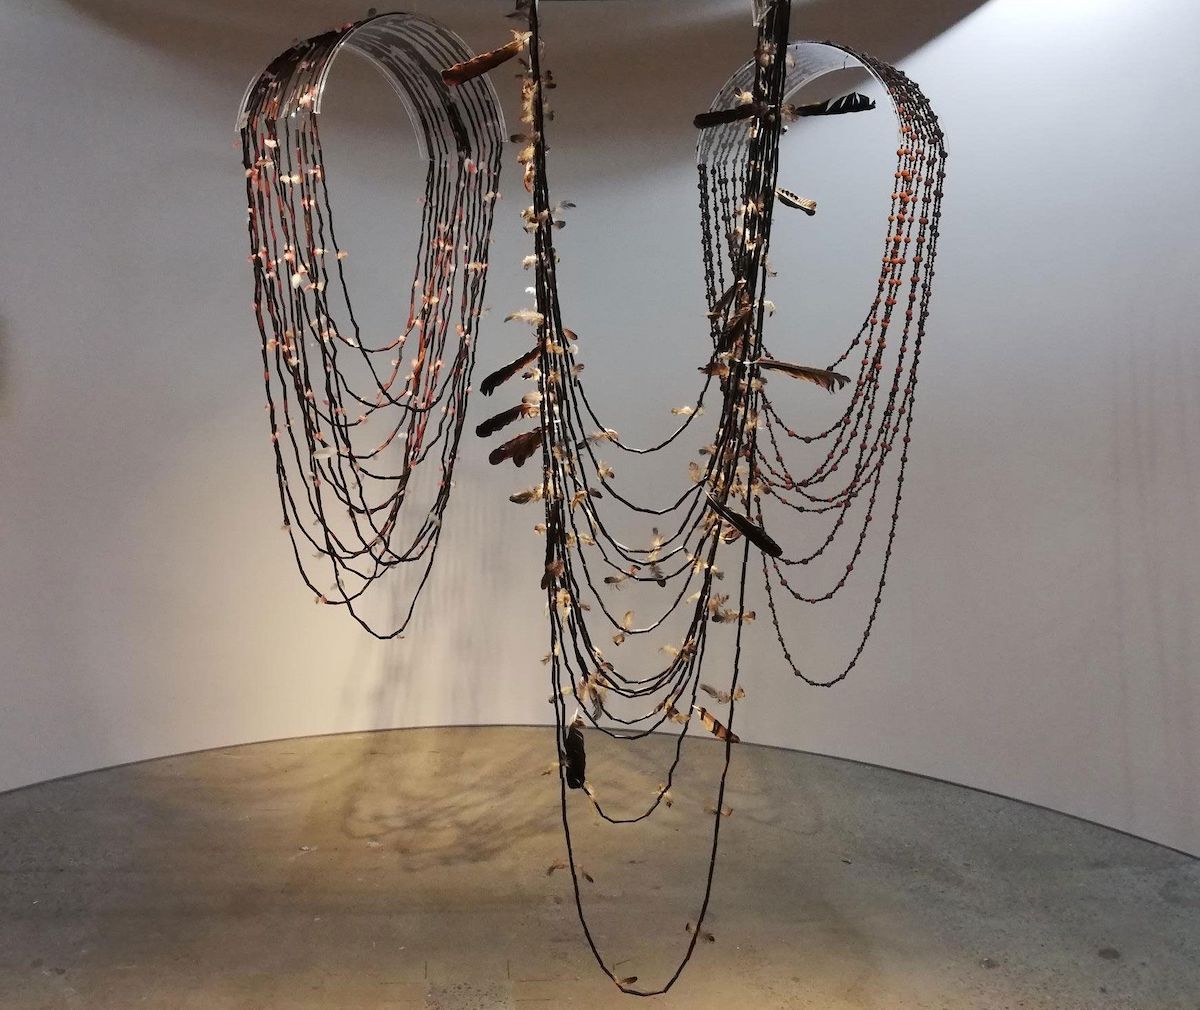 Three super-sized necklaces, made from river reeds and bird feathers, hanging from the ceiling